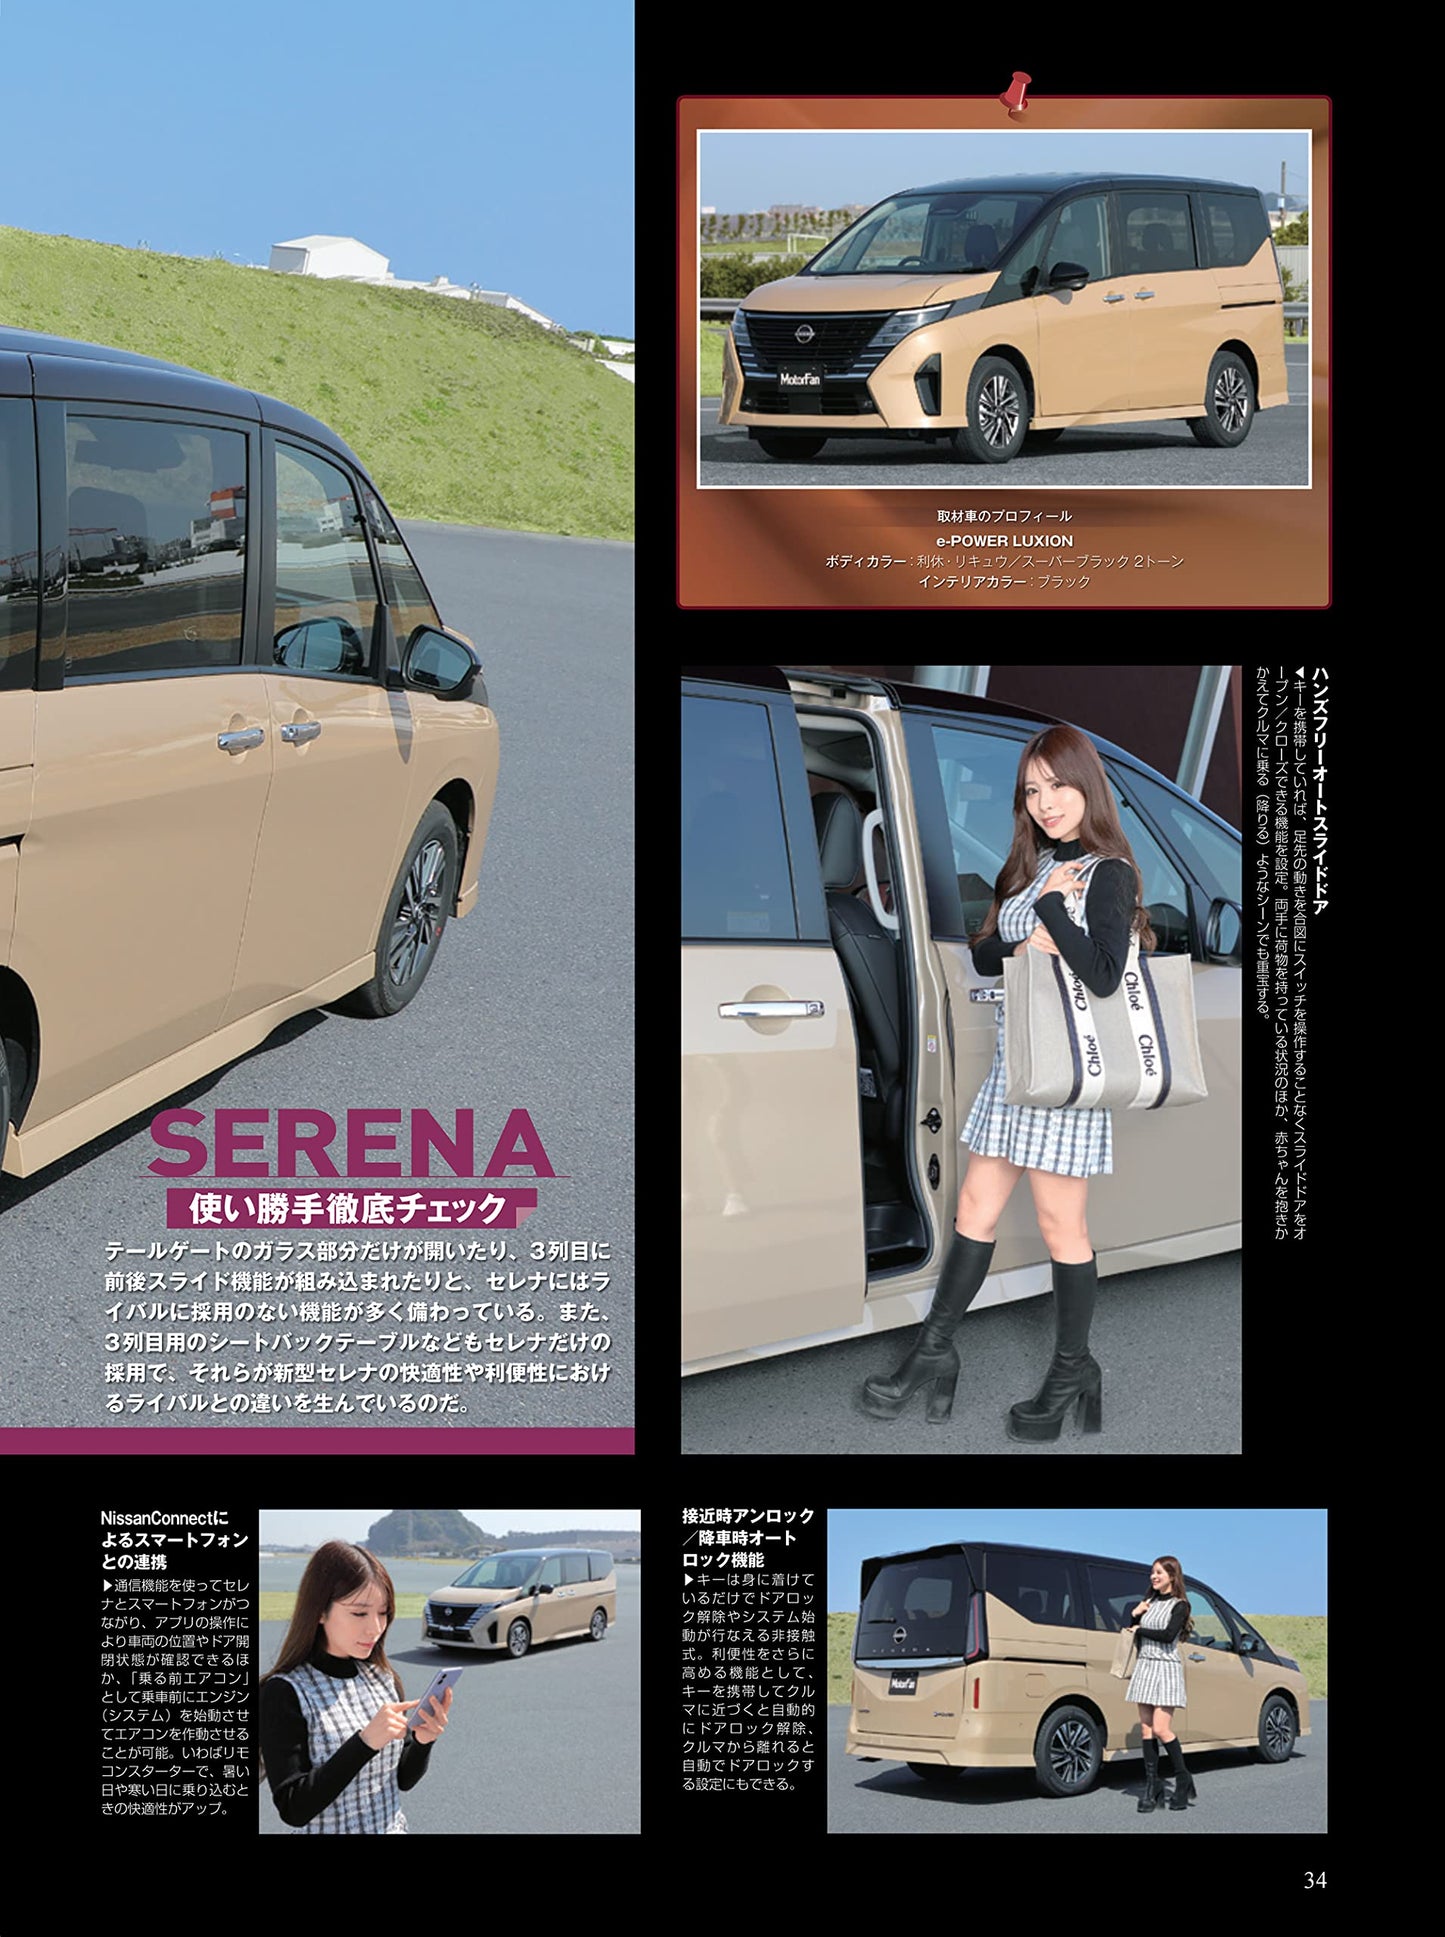 All About NISSAN Serena New Model